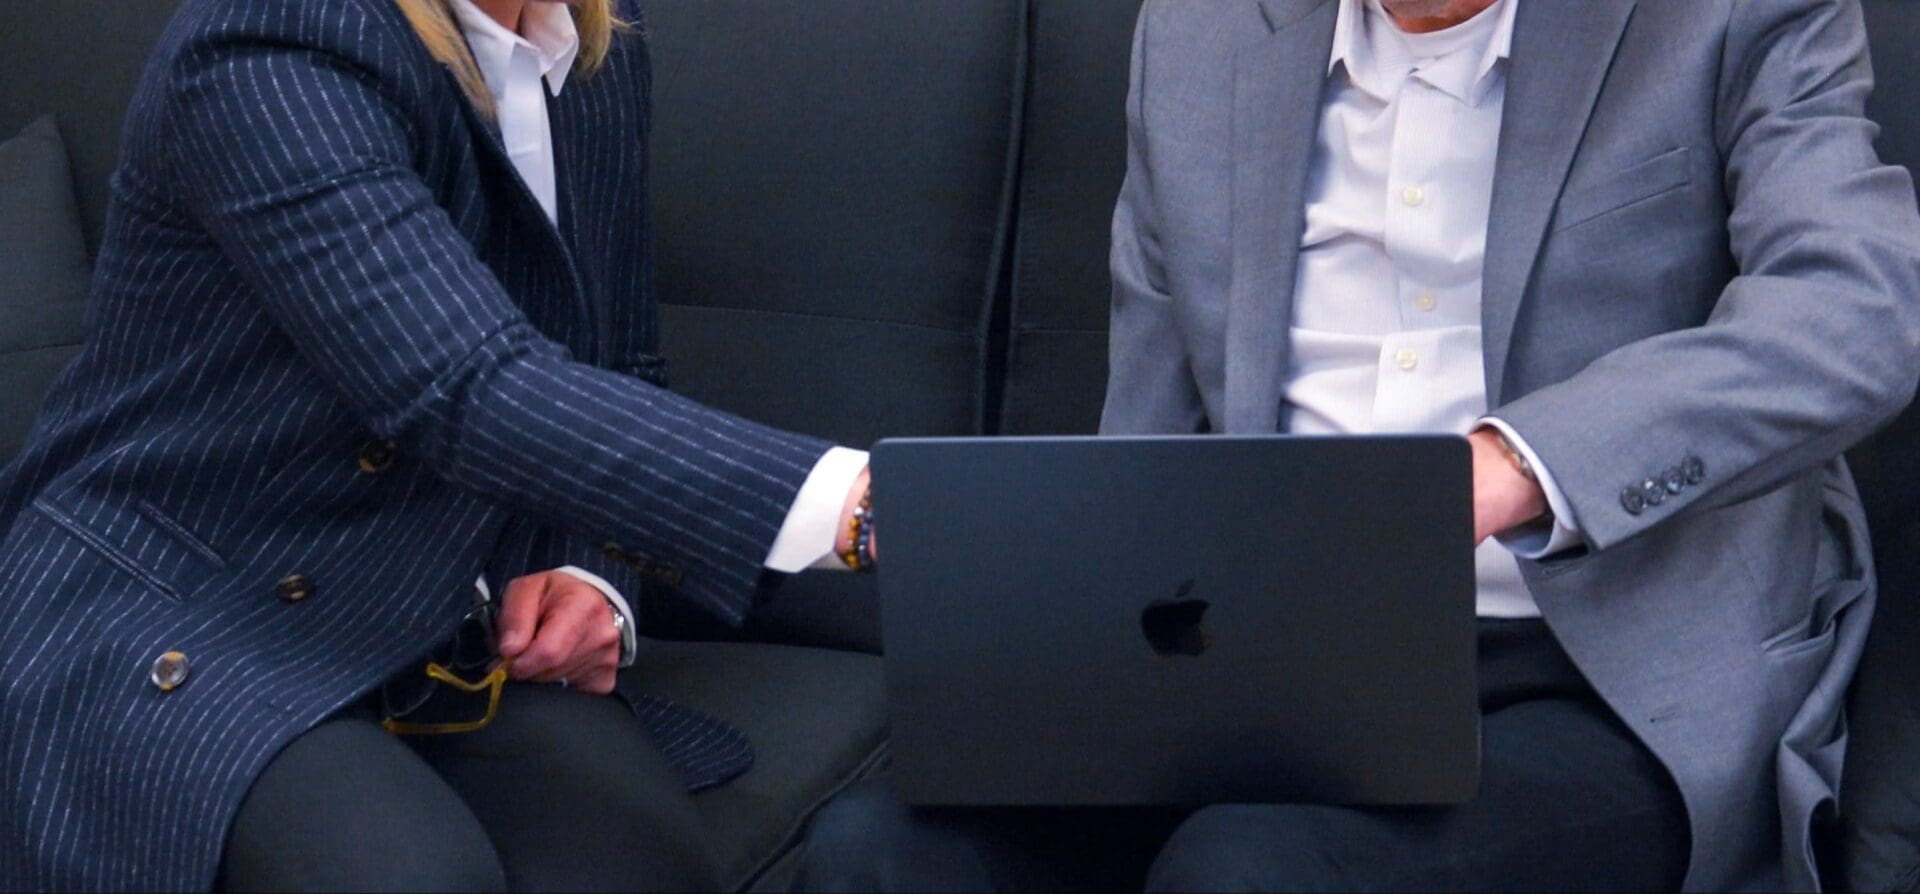 Two people sitting on a couch with one holding an apple laptop.